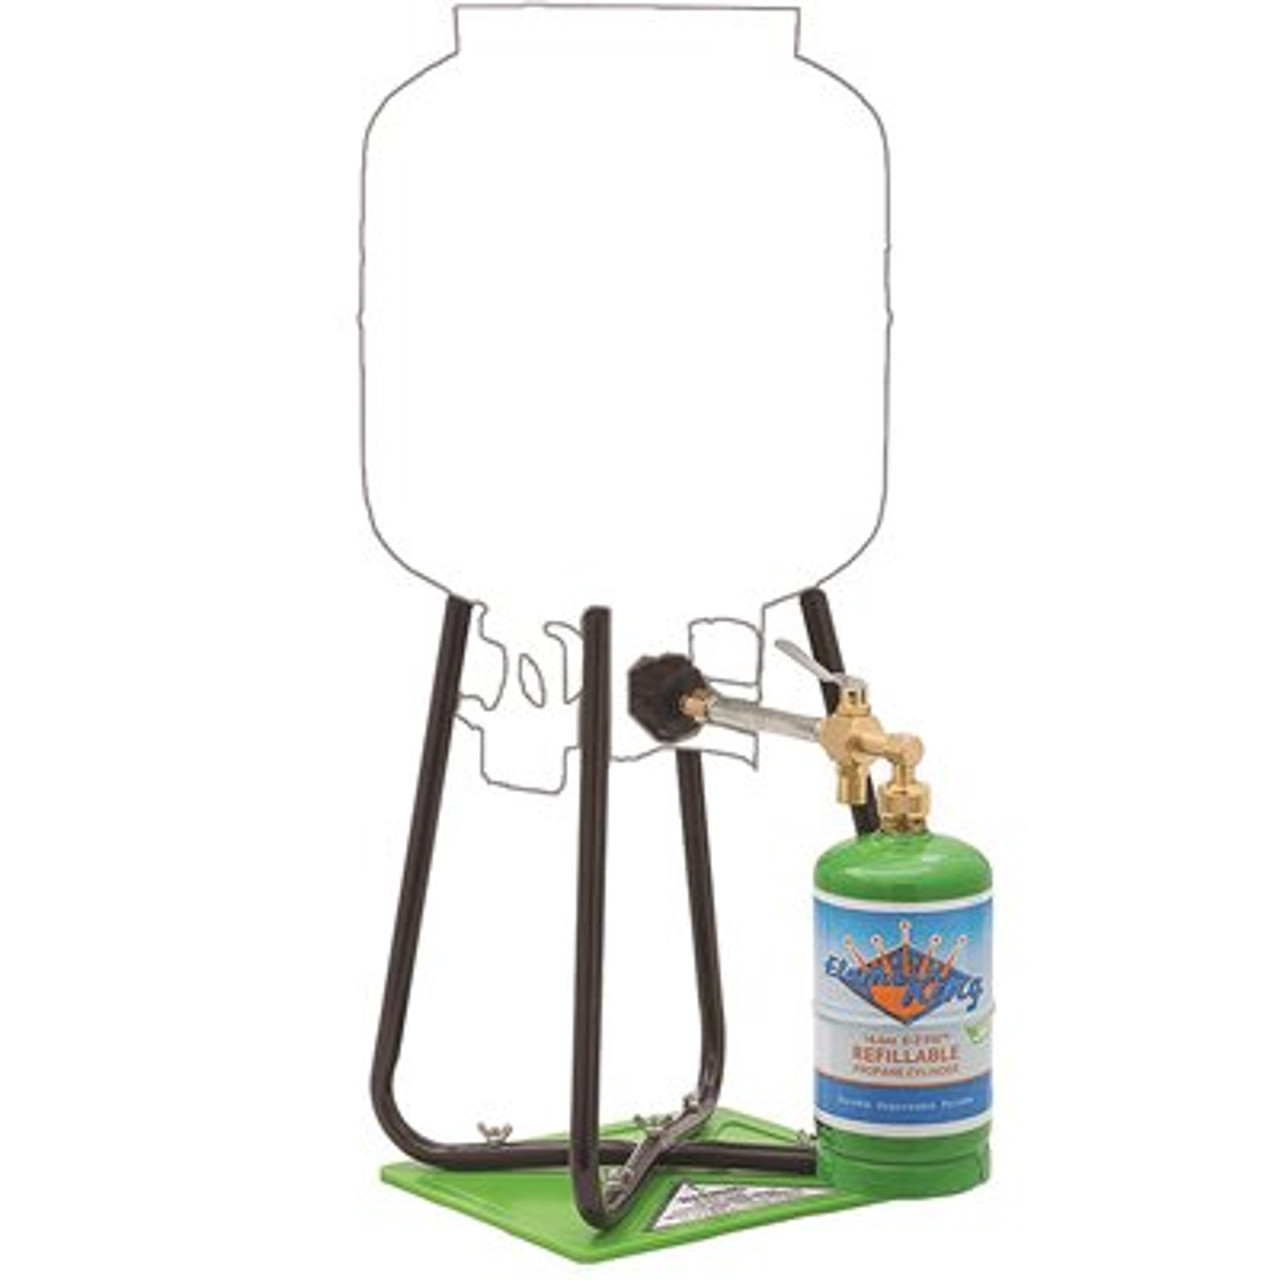 Flame King 1 lb. Refillable Propane Cylinder with Refill Kit